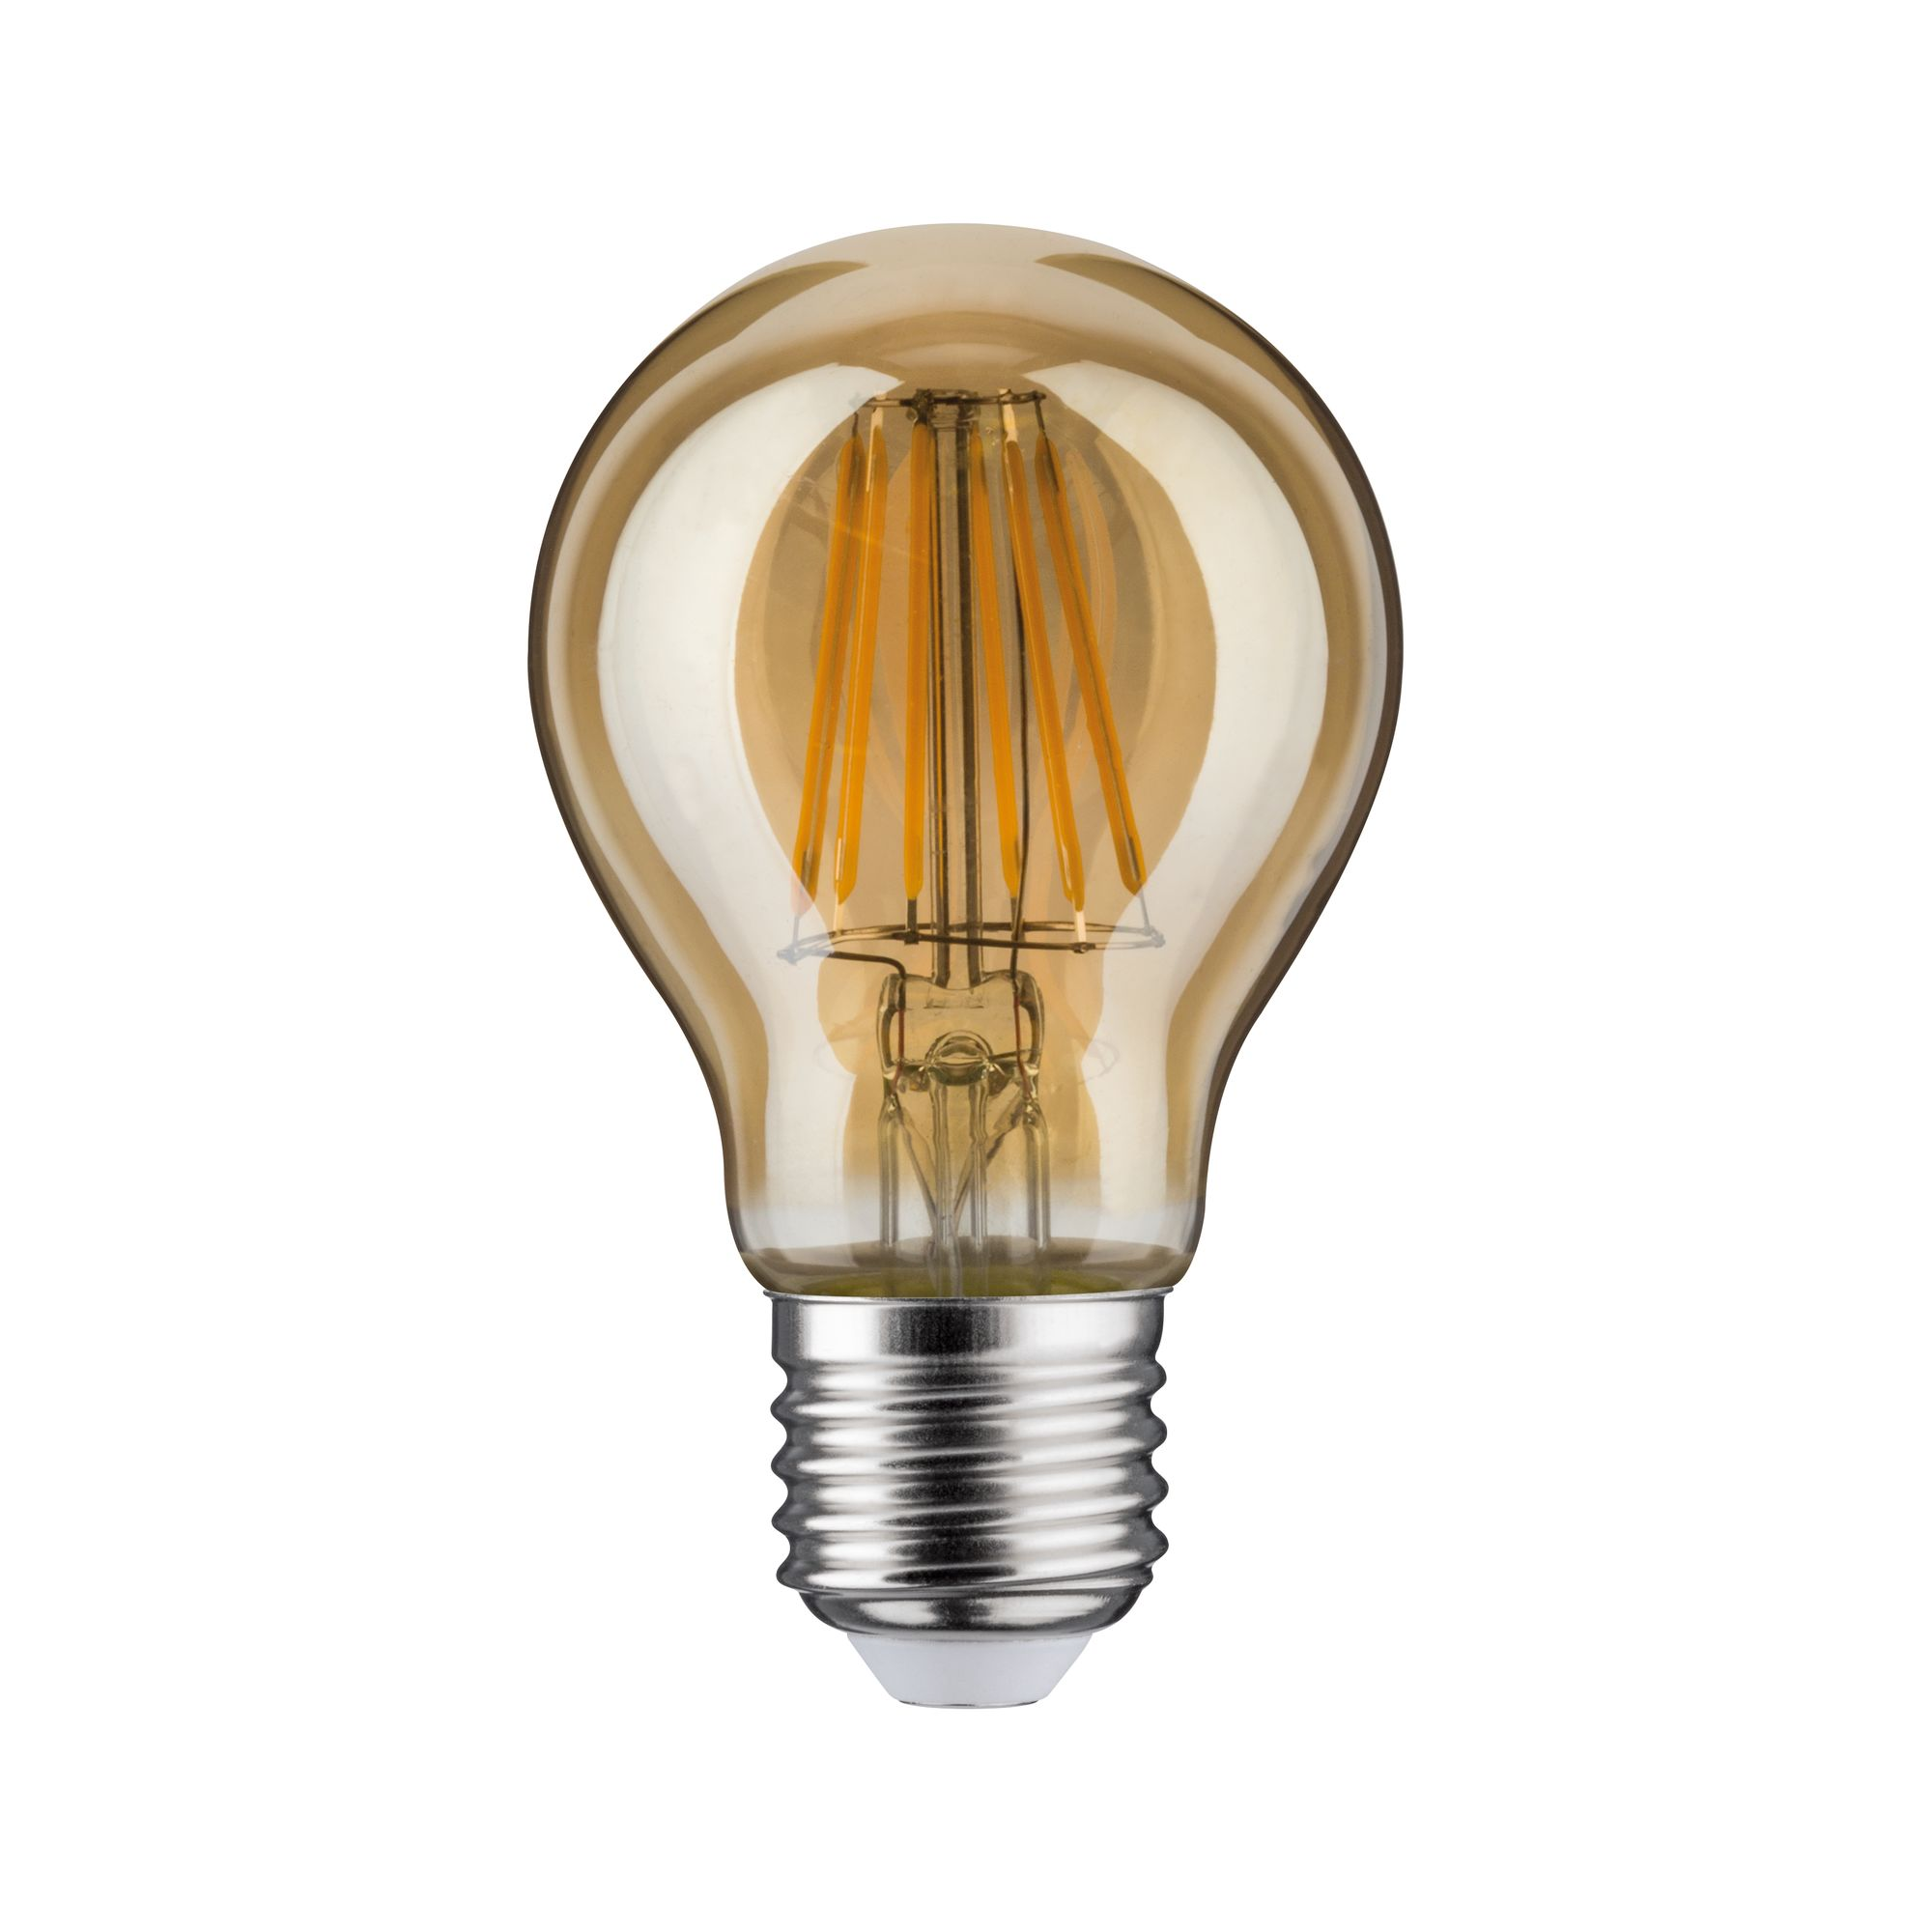 LED-Lampe E27 6,5W (53W) 680 lm warmgold + product picture